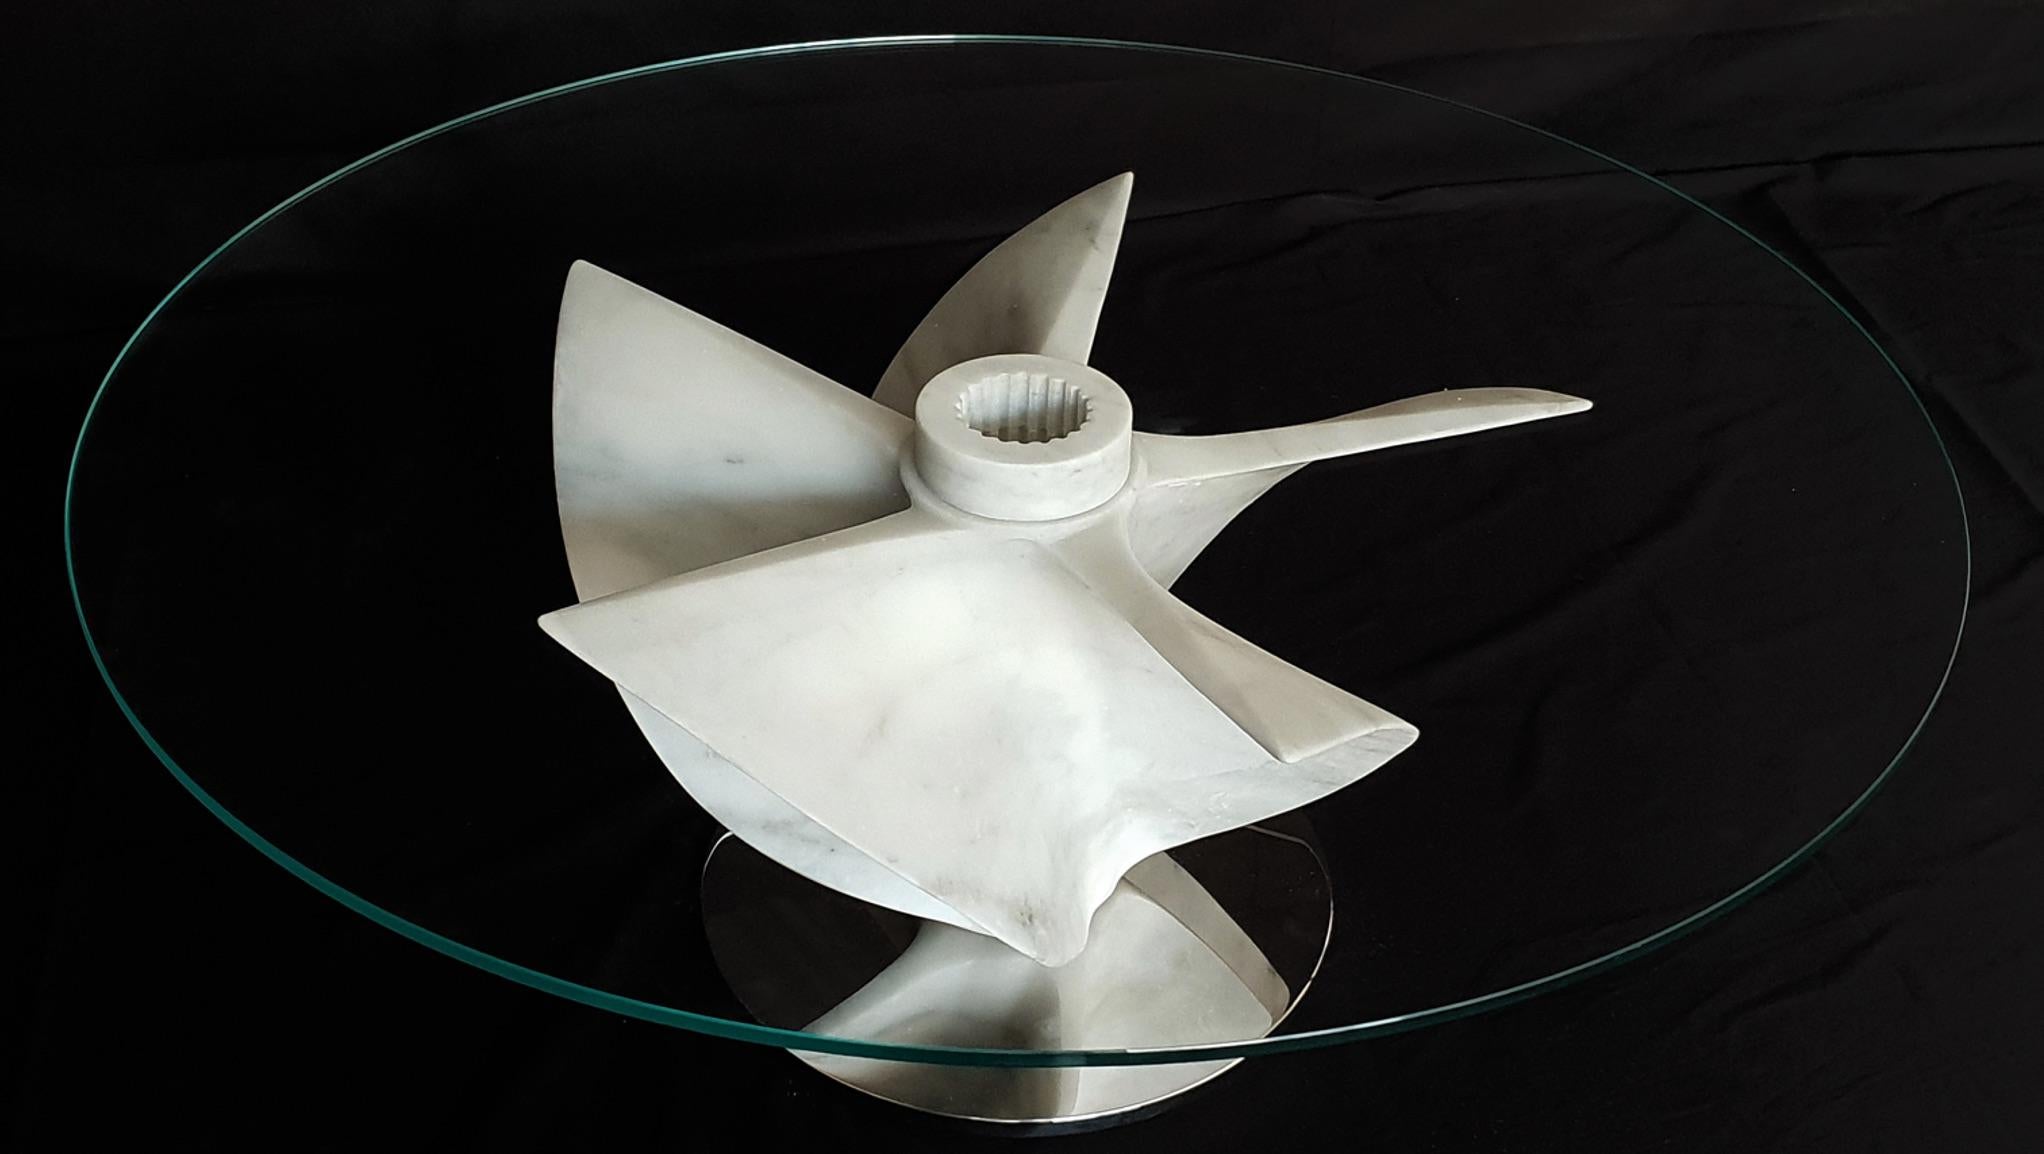 The Idro Propellor table is a collaborative effort created with Silvestri Marmi in Carrara, Italy and designer Damiano Spelta of Milano. 

This contemporary nautically themed table is created in white Carrara Marble with a steel base. A truly